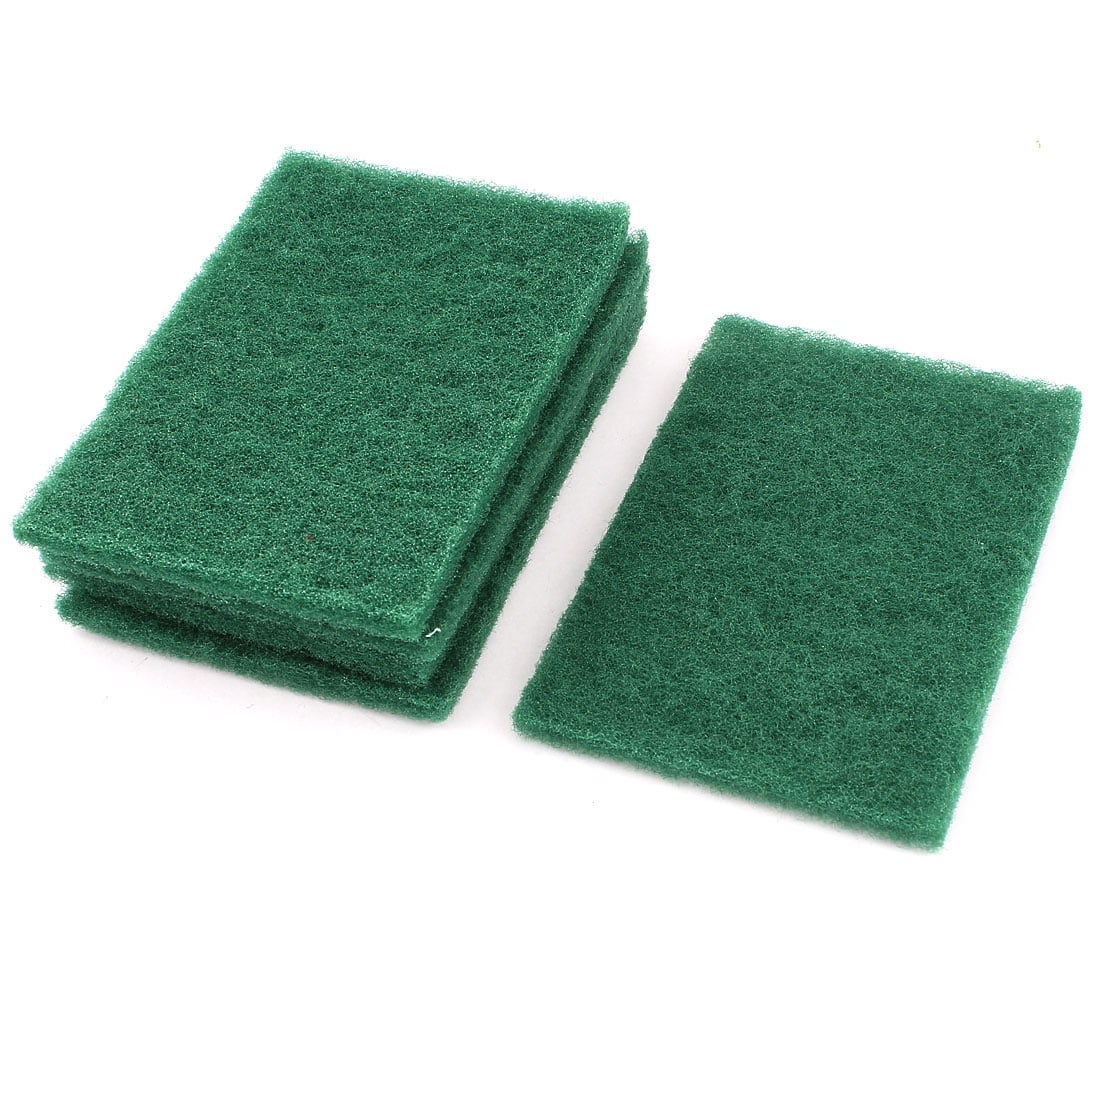 30 Green Multicoloured Kitchen Sink Washing Up Cleaning Sponges Pads Scourers 